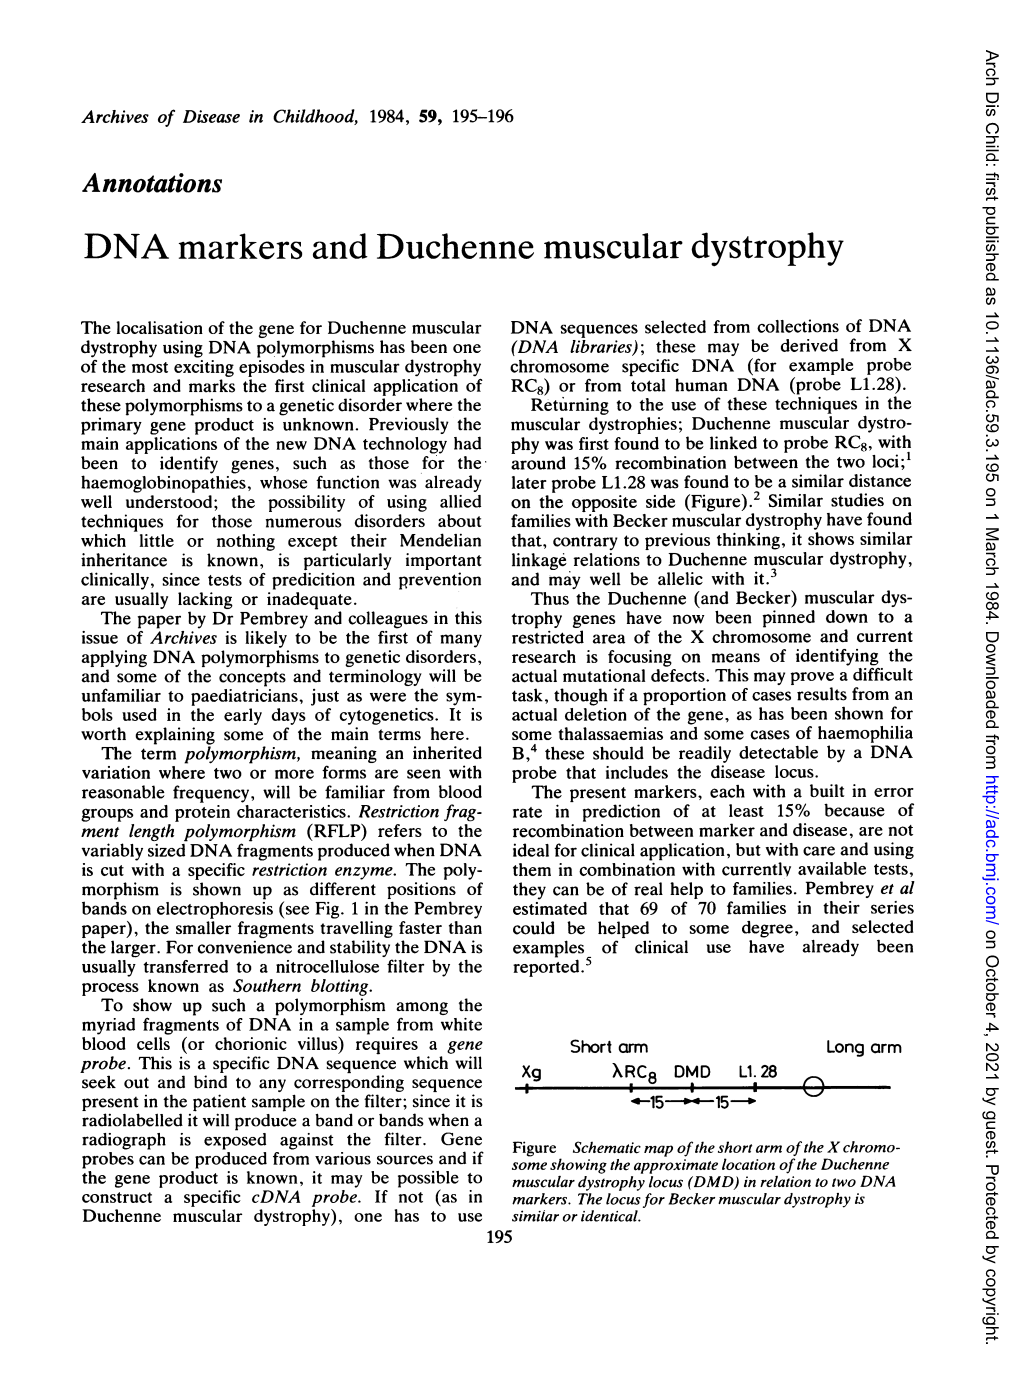 DNA Markers and Duchenne Muscular Dystrophy